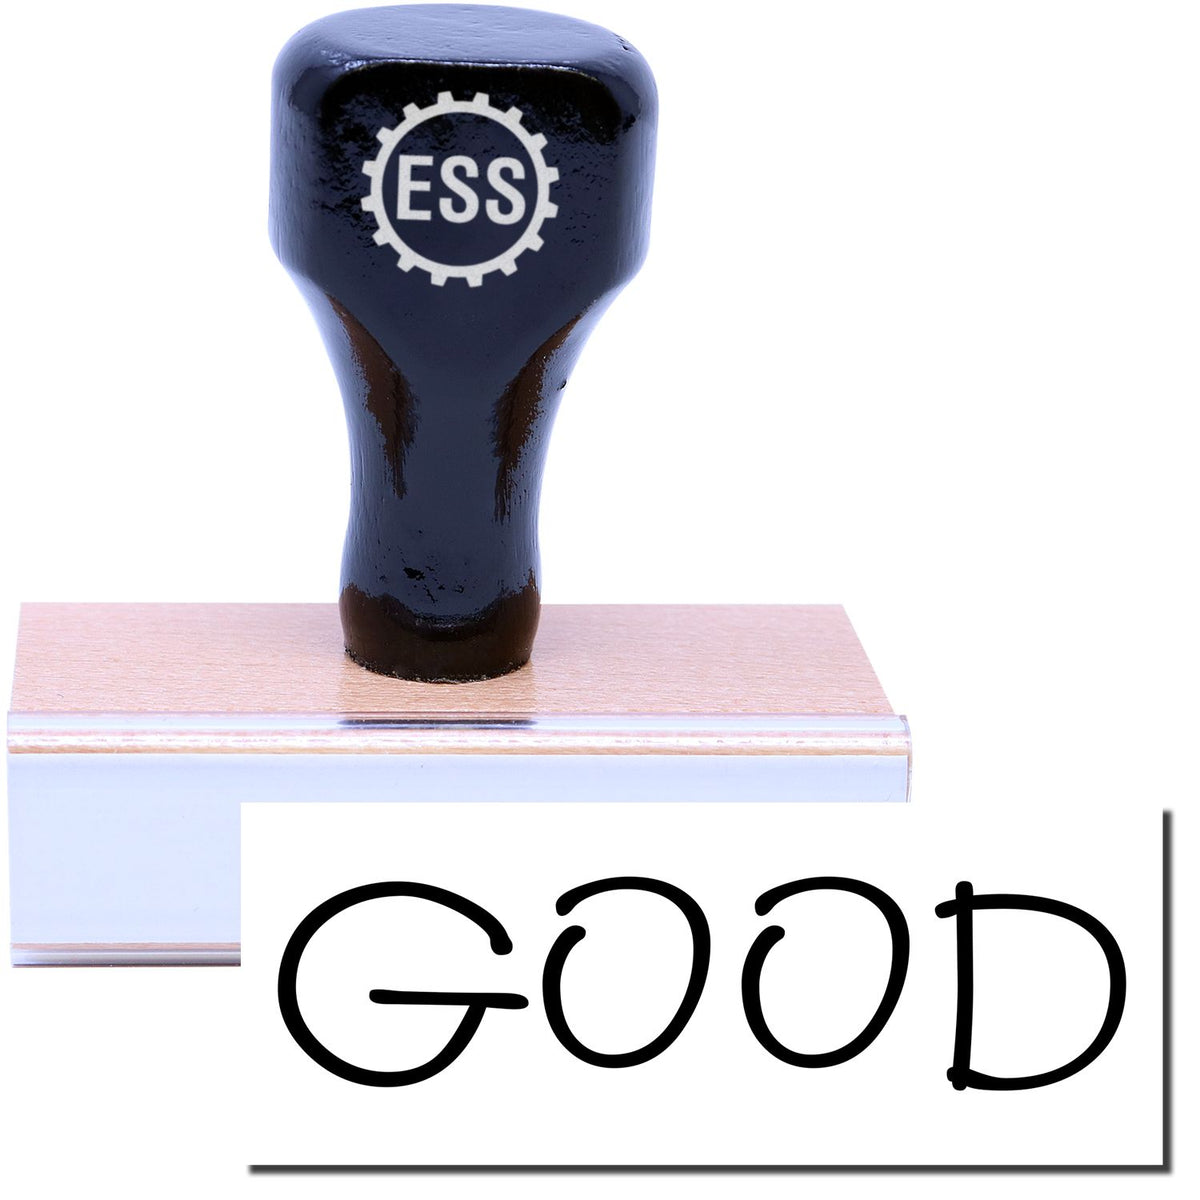 A stock office rubber stamp with a stamped image showing how the text &quot;GOOD&quot; is displayed after stamping.